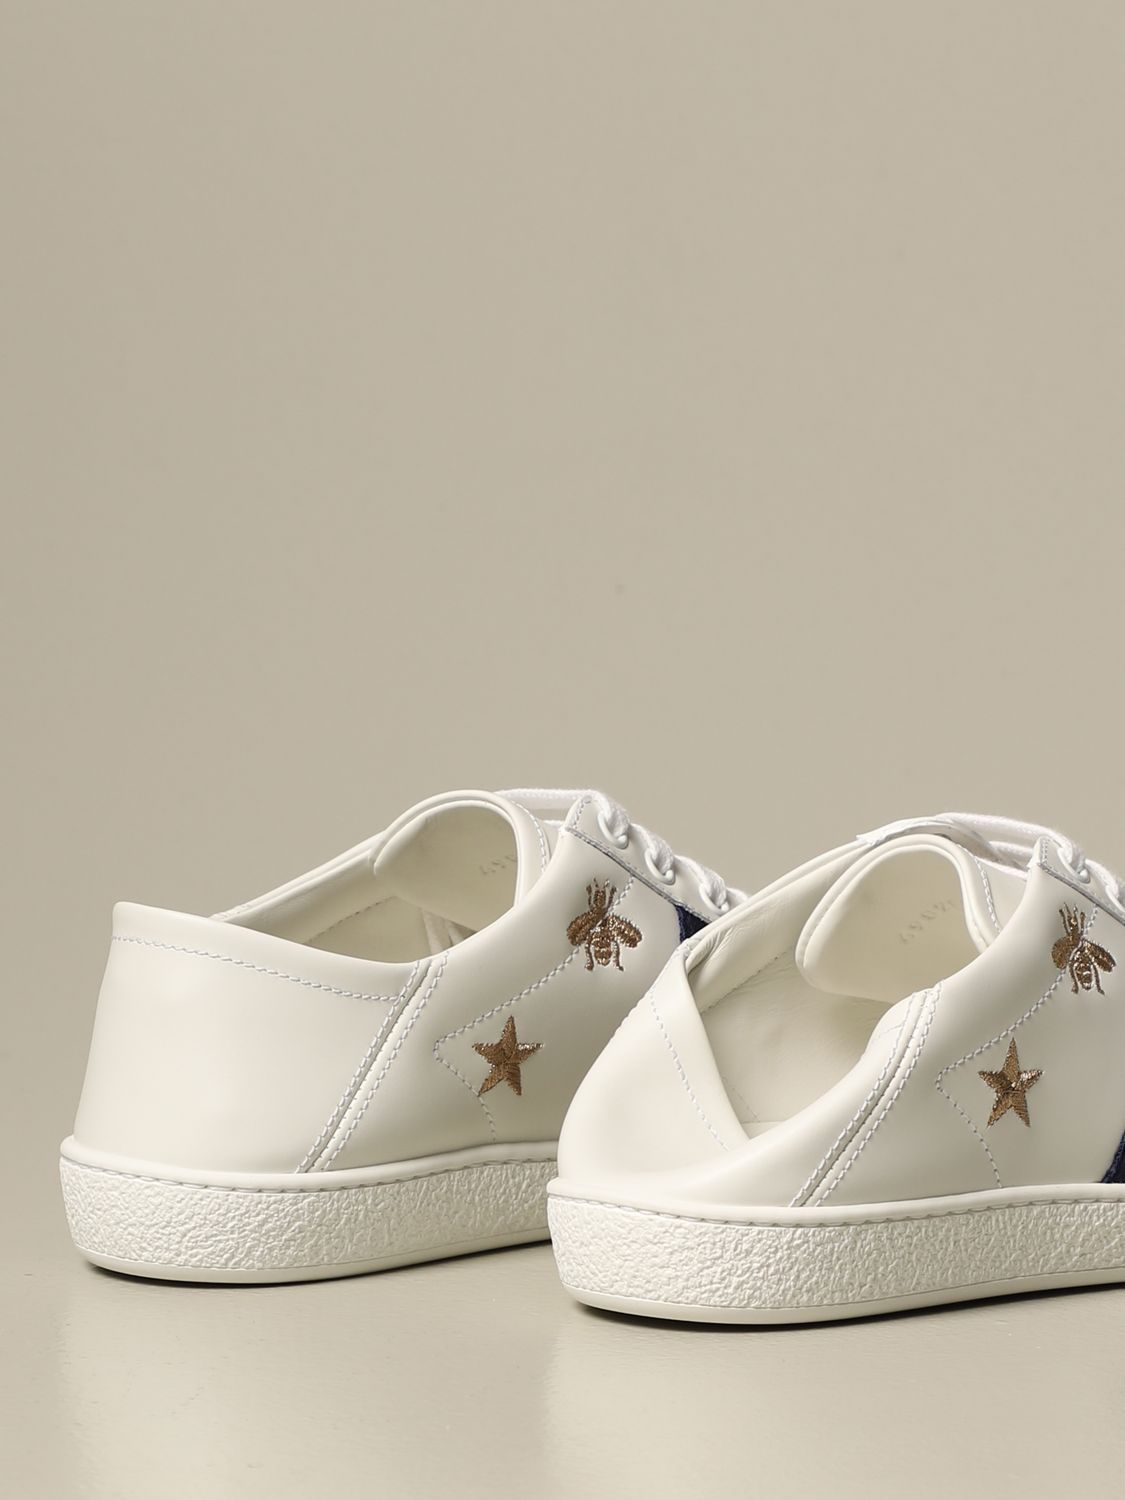 gucci sneakers bees and stars